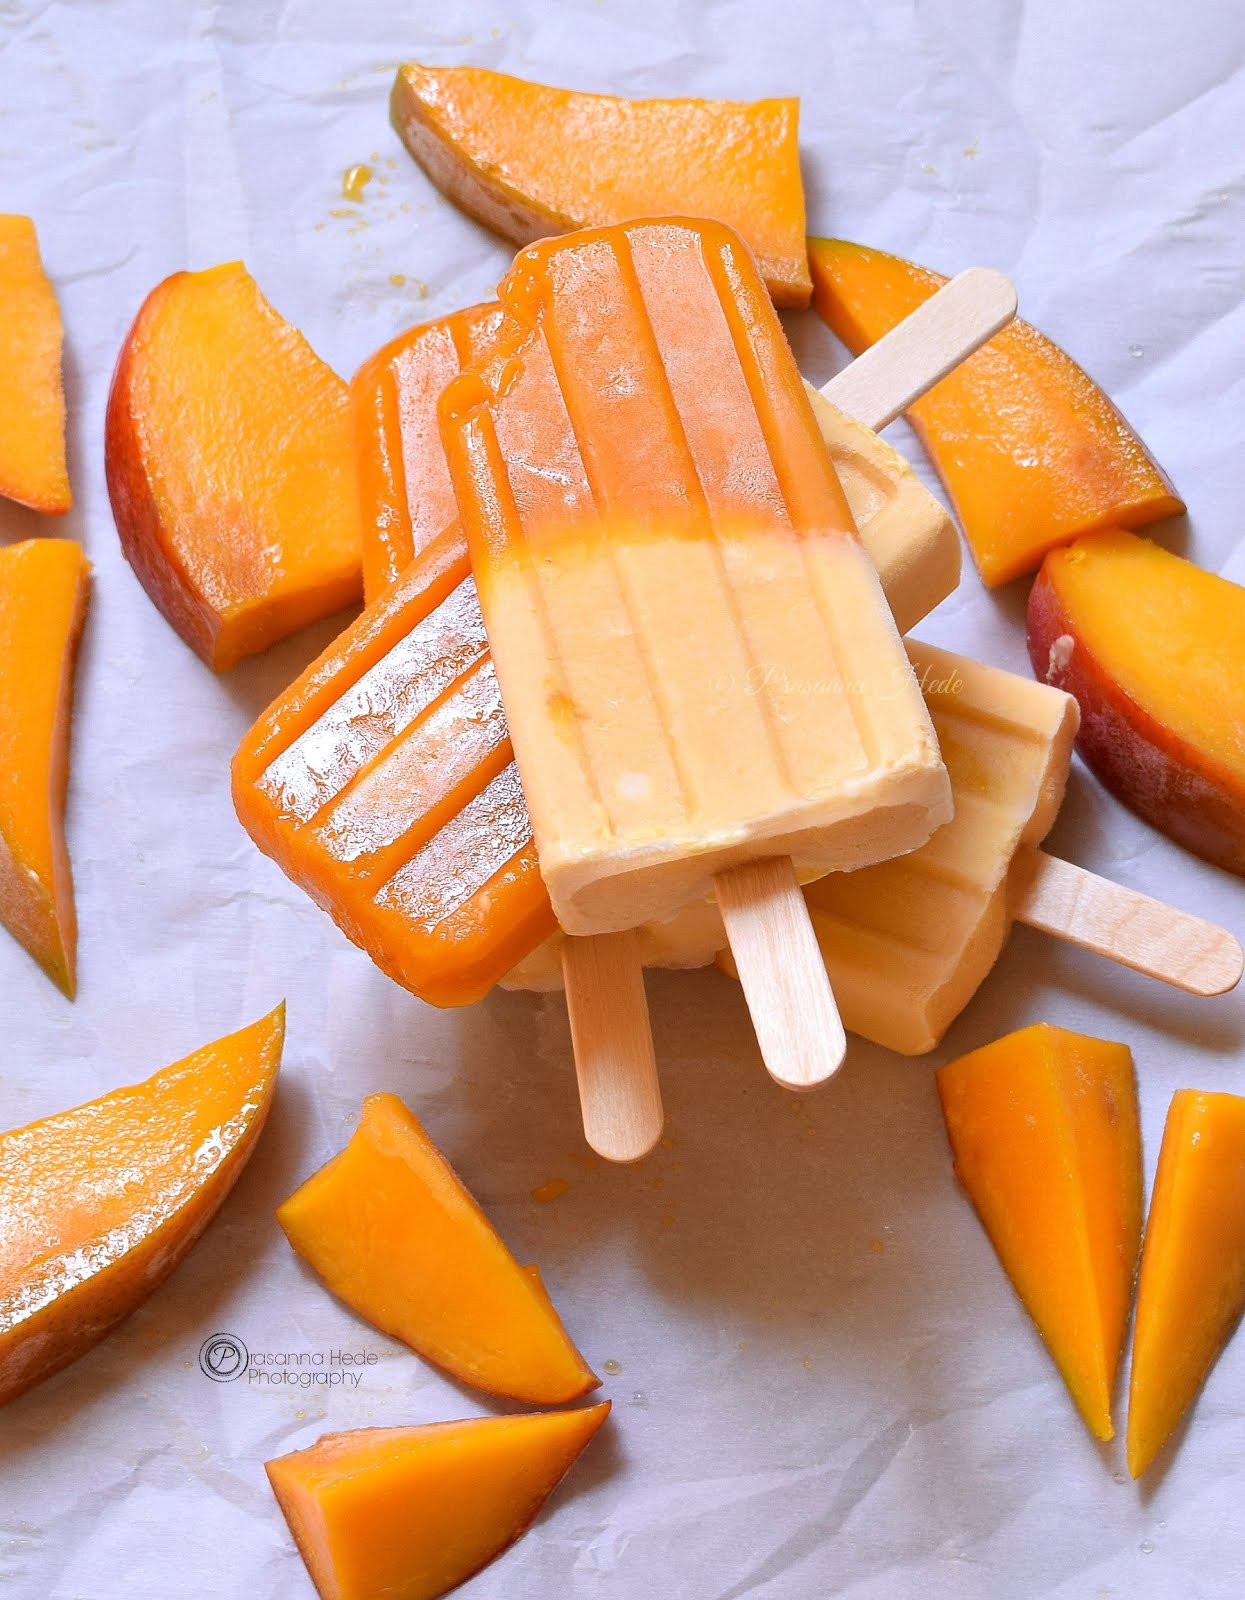 Anotger look of Mango Creamy Popsicles spread along with cut Mango pieces